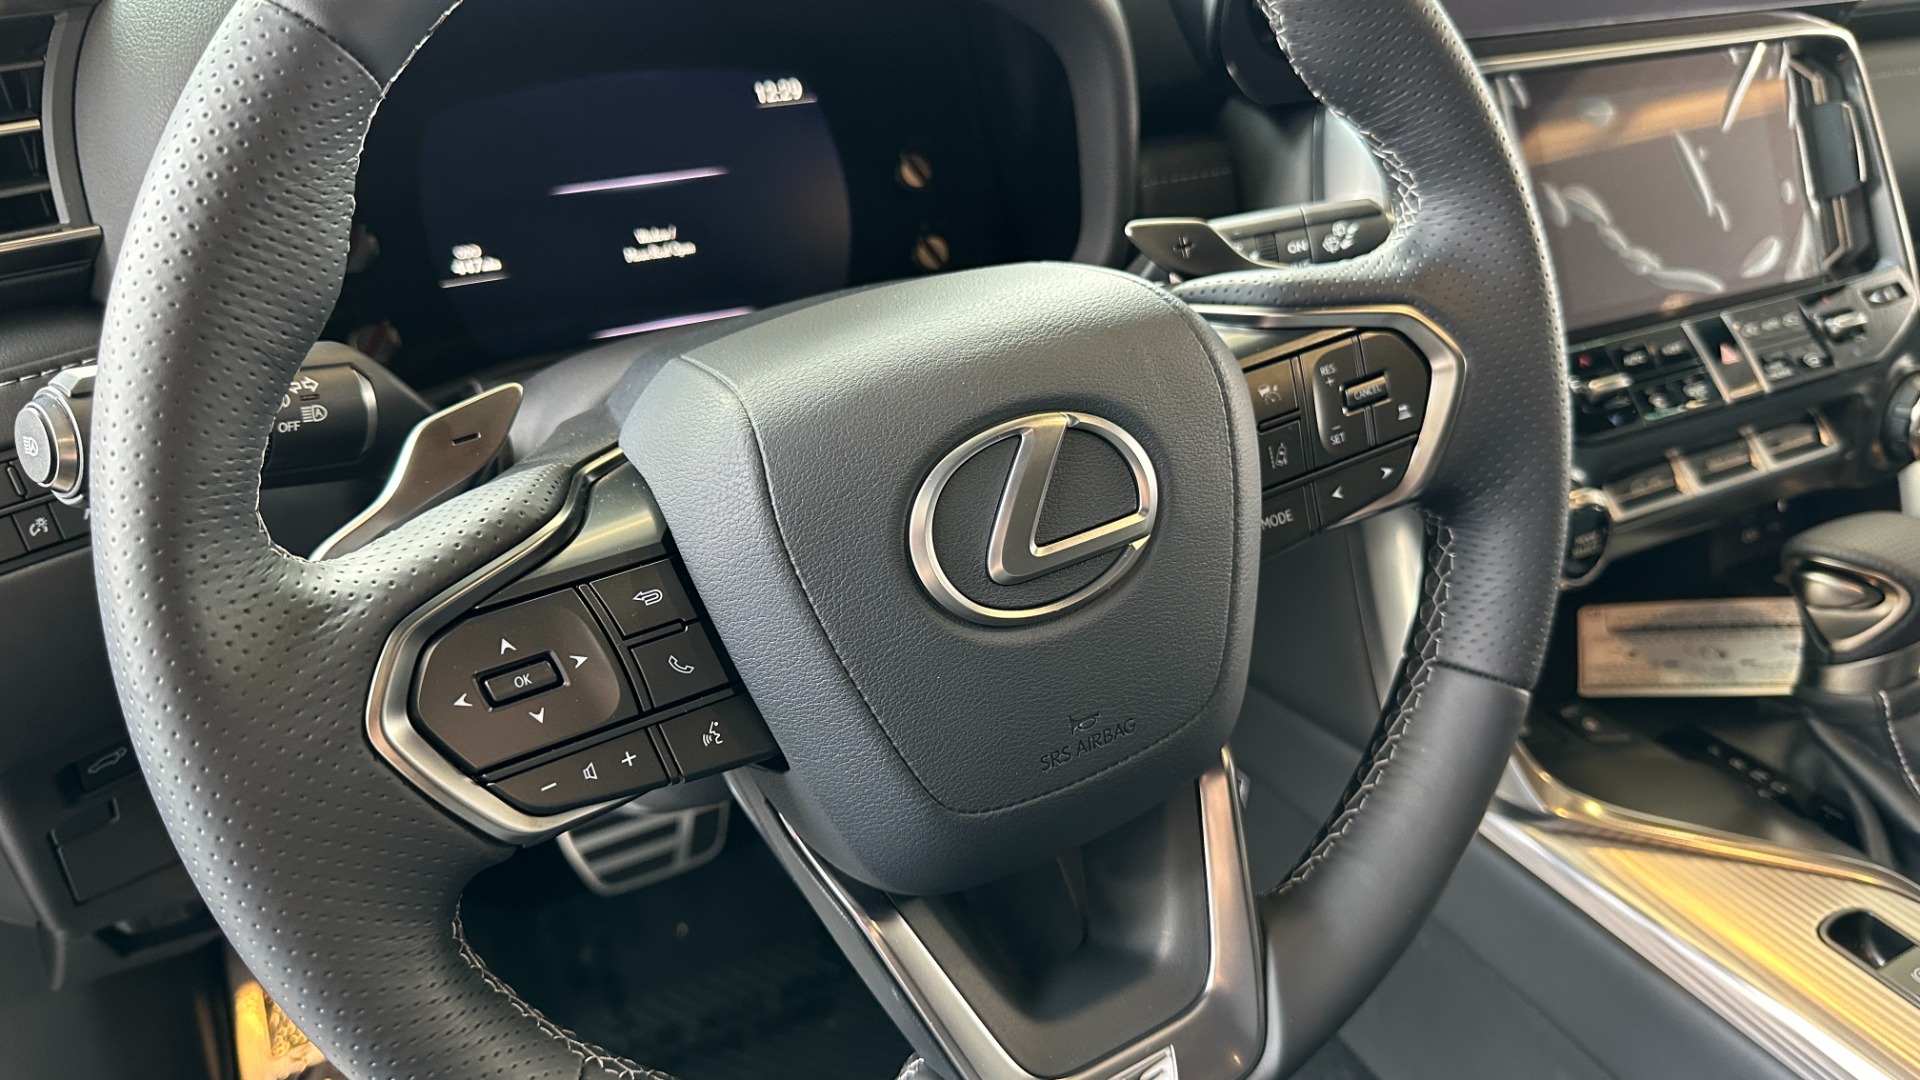 Used 2023 Lexus LX LX 600 F SPORT / MARK LEVINSON / HEIGHT CONTROL / CROSS BARS for sale $138,499 at Formula Imports in Charlotte NC 28227 17